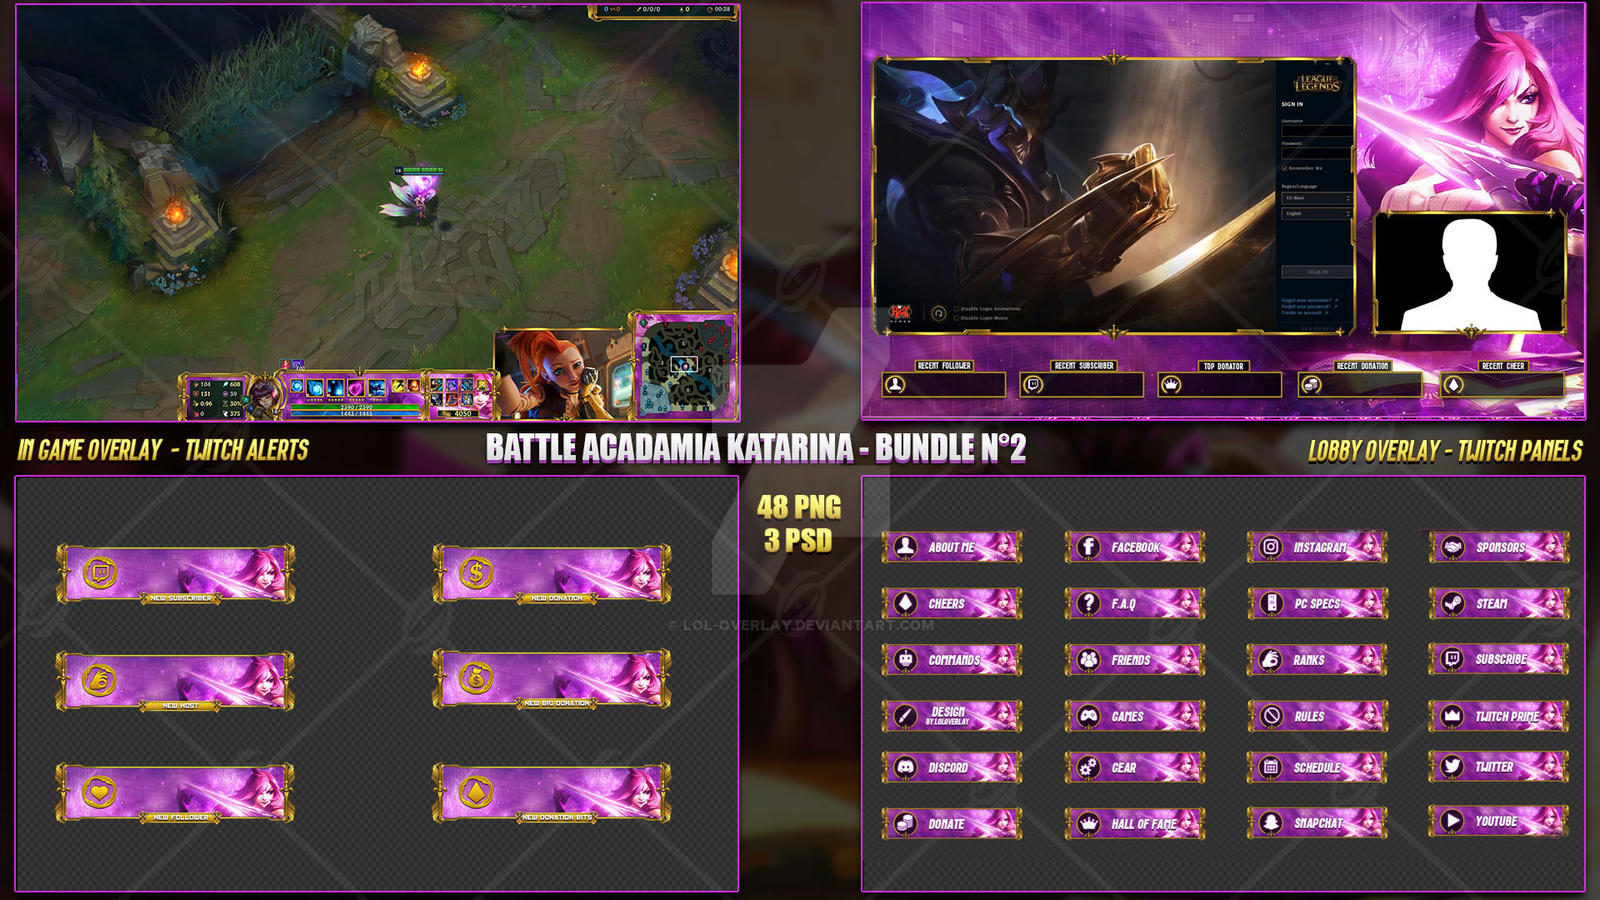 Twitch League of Legends Overlay - JUST CHATTING 2 by Alenarya on